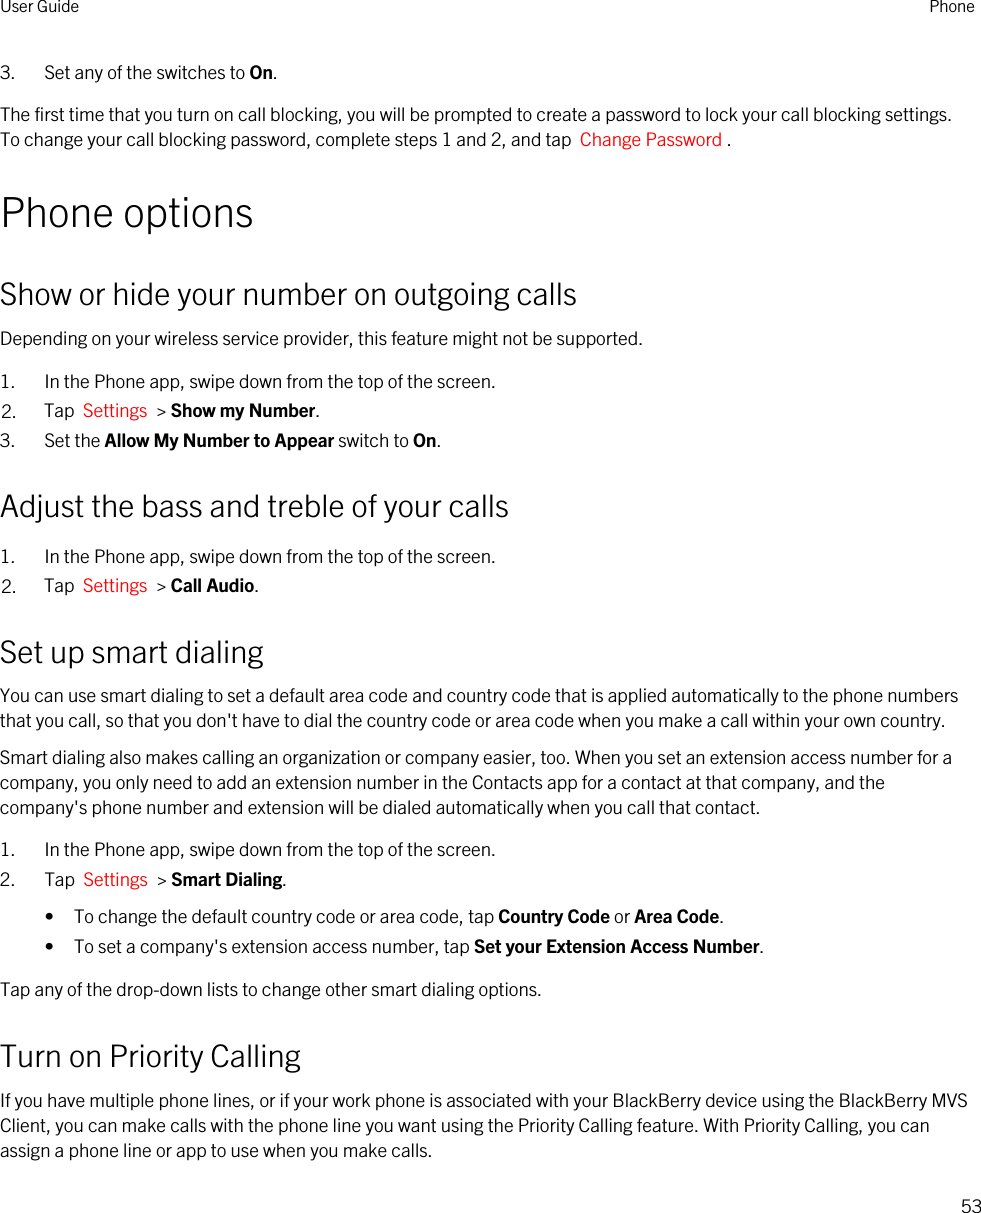 3. Set any of the switches to On.The first time that you turn on call blocking, you will be prompted to create a password to lock your call blocking settings. To change your call blocking password, complete steps 1 and 2, and tap  Change Password .Phone optionsShow or hide your number on outgoing callsDepending on your wireless service provider, this feature might not be supported. 1. In the Phone app, swipe down from the top of the screen.2. Tap  Settings  &gt; Show my Number.3. Set the Allow My Number to Appear switch to On.Adjust the bass and treble of your calls1. In the Phone app, swipe down from the top of the screen.2. Tap  Settings  &gt; Call Audio.Set up smart dialingYou can use smart dialing to set a default area code and country code that is applied automatically to the phone numbers that you call, so that you don&apos;t have to dial the country code or area code when you make a call within your own country.Smart dialing also makes calling an organization or company easier, too. When you set an extension access number for a company, you only need to add an extension number in the Contacts app for a contact at that company, and the company&apos;s phone number and extension will be dialed automatically when you call that contact.1. In the Phone app, swipe down from the top of the screen.2. Tap  Settings  &gt; Smart Dialing.• To change the default country code or area code, tap Country Code or Area Code.• To set a company&apos;s extension access number, tap Set your Extension Access Number.Tap any of the drop-down lists to change other smart dialing options.Turn on Priority CallingIf you have multiple phone lines, or if your work phone is associated with your BlackBerry device using the BlackBerry MVS Client, you can make calls with the phone line you want using the Priority Calling feature. With Priority Calling, you can assign a phone line or app to use when you make calls.User Guide Phone53